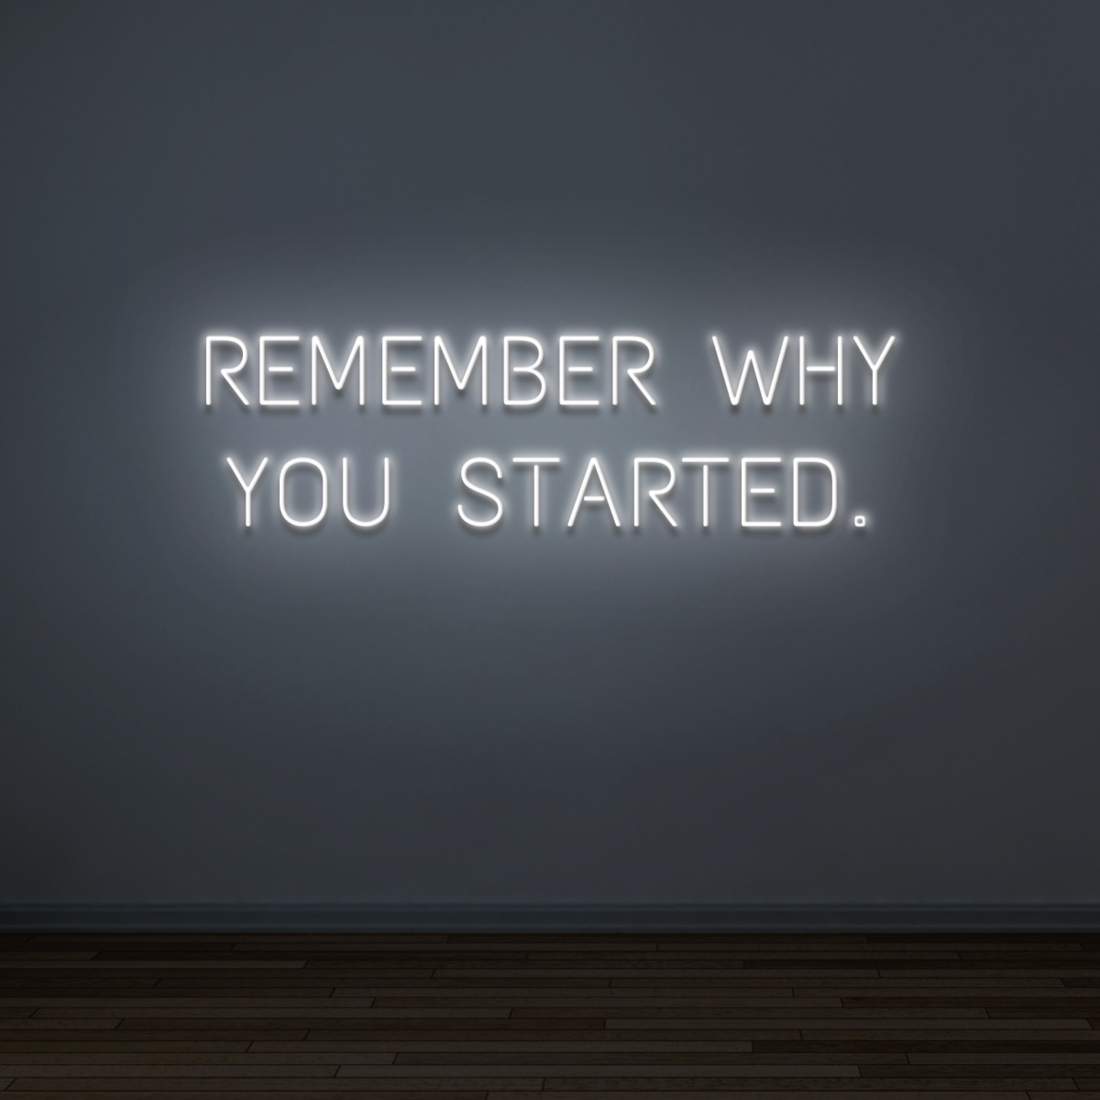 "REMEMBER WHY YOU STARTED" - NEONIDAS NEONSCHILD LED-SCHILD